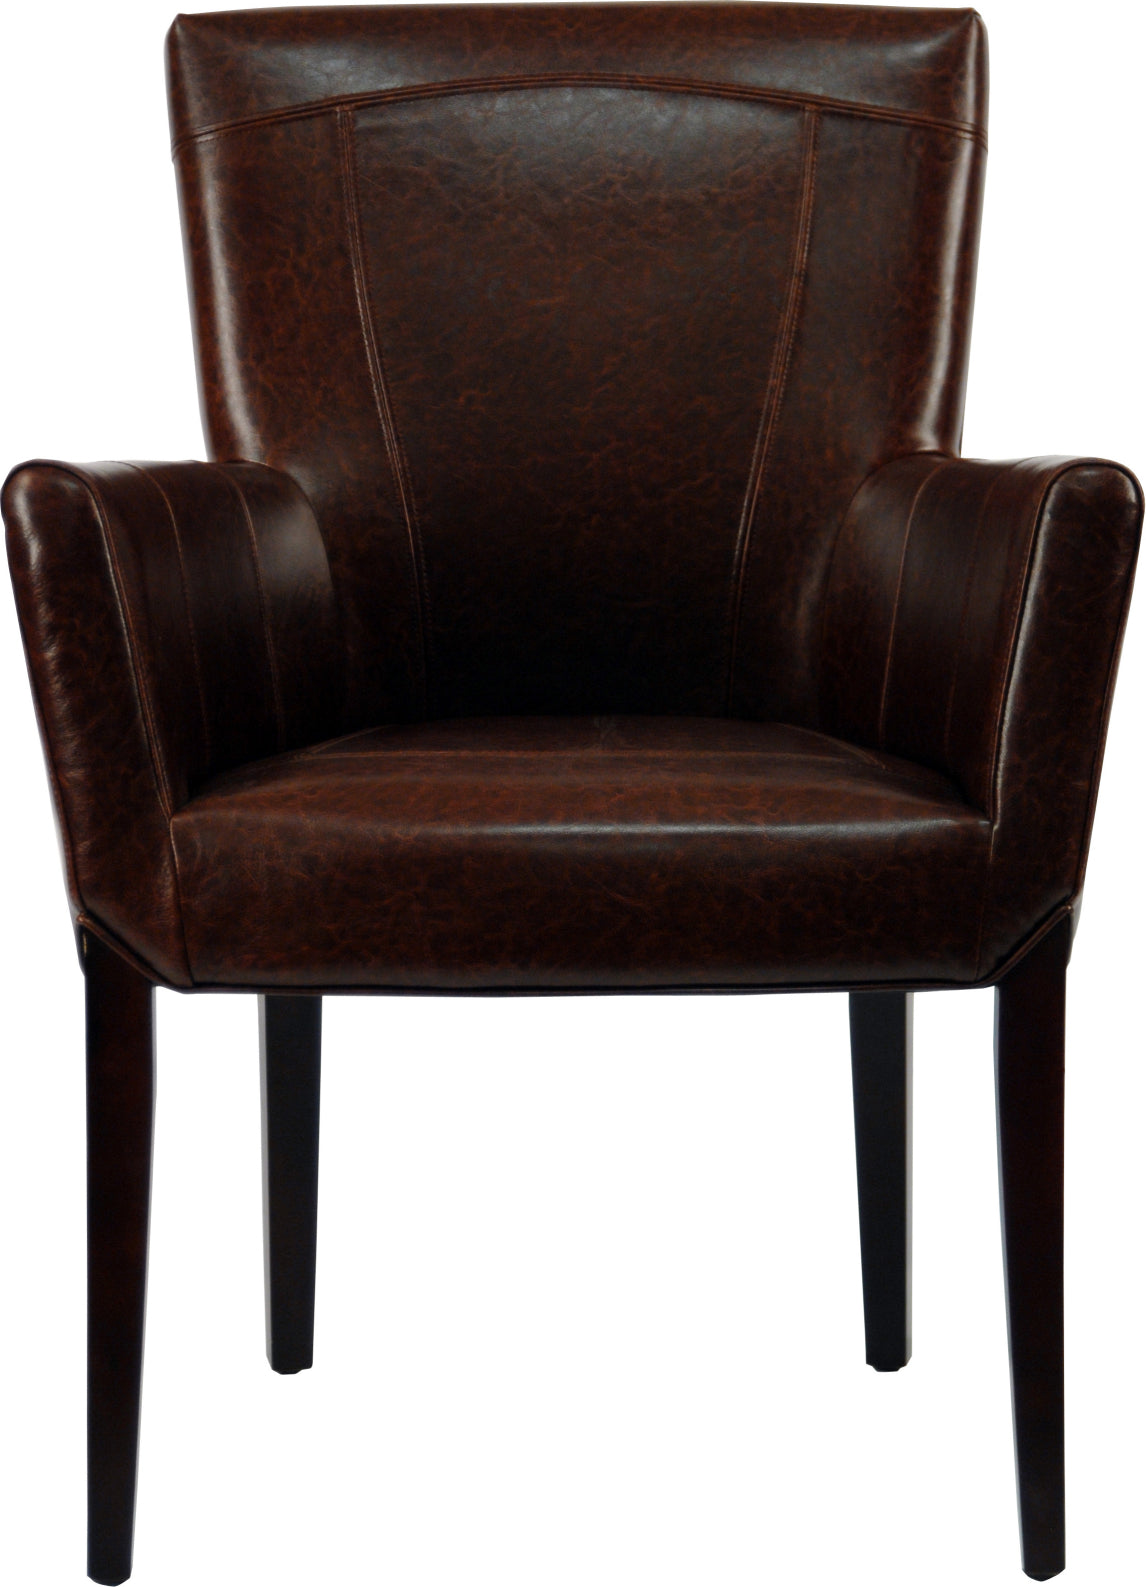 Safavieh Ken Leather Arm Chair Brown and Cherry Mahogany Furniture main image